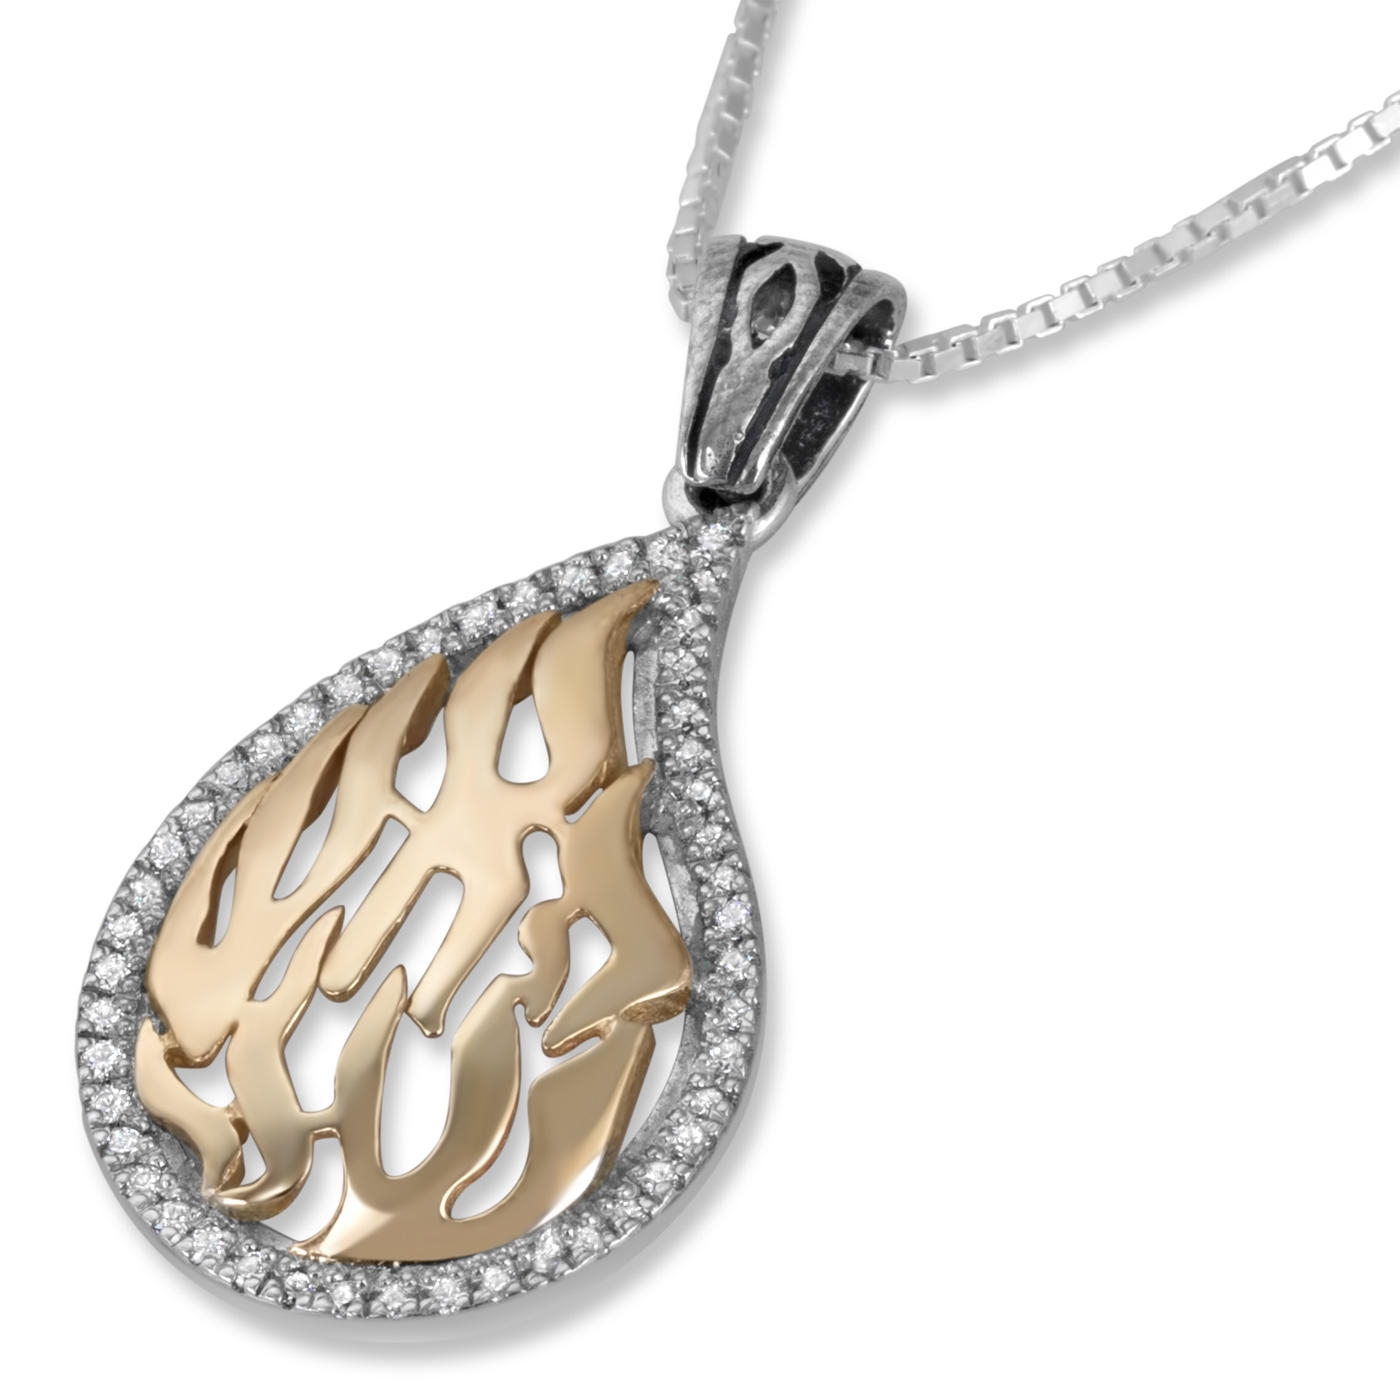 9K Gold HaEsh Sheli Teardrop Necklace with Cubic Zirconia Outline - 1